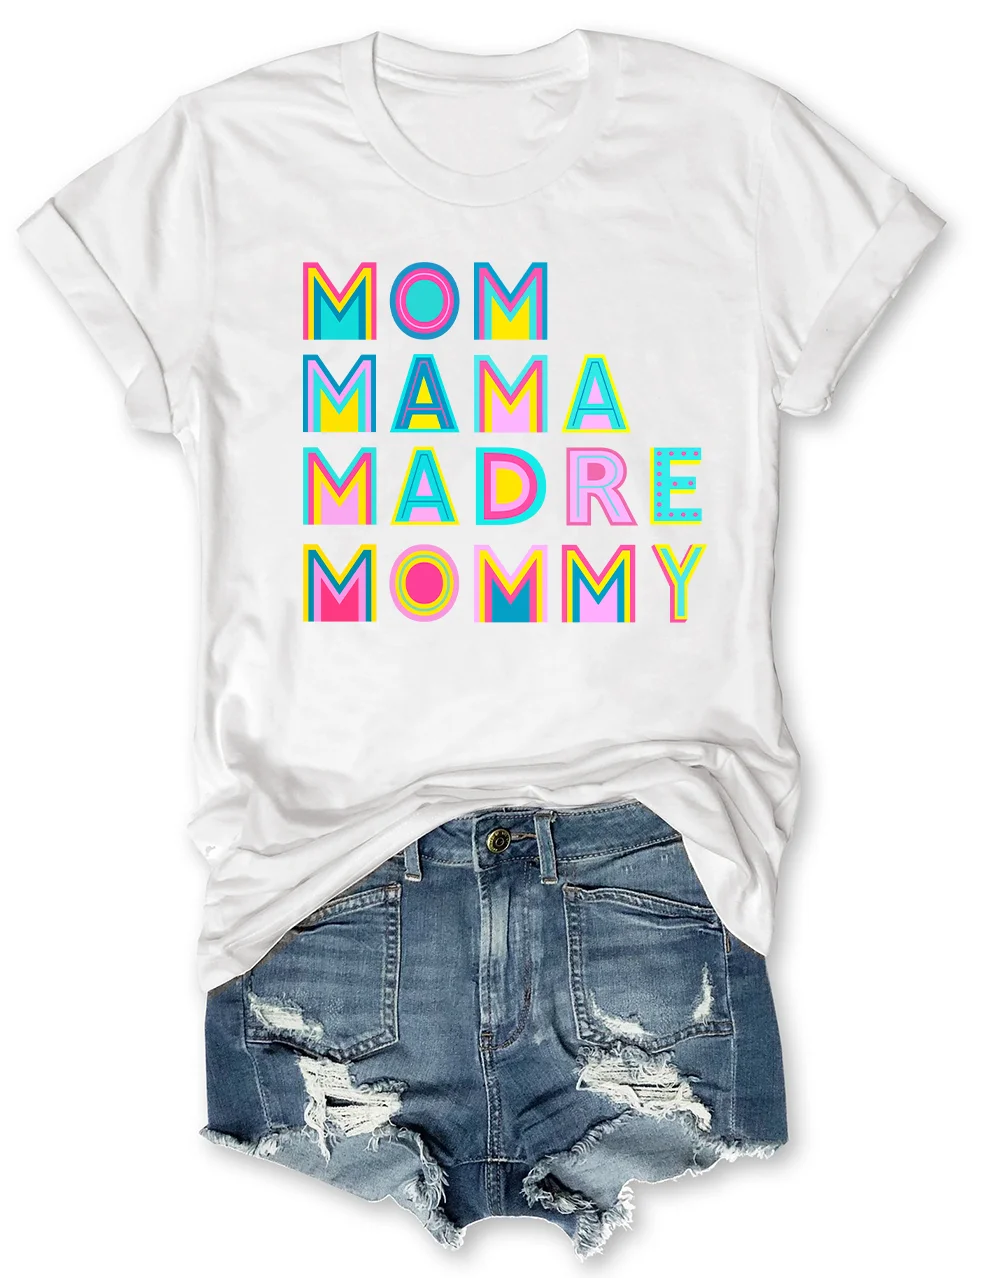 Mom Mama Madre Mommy T-Shirt